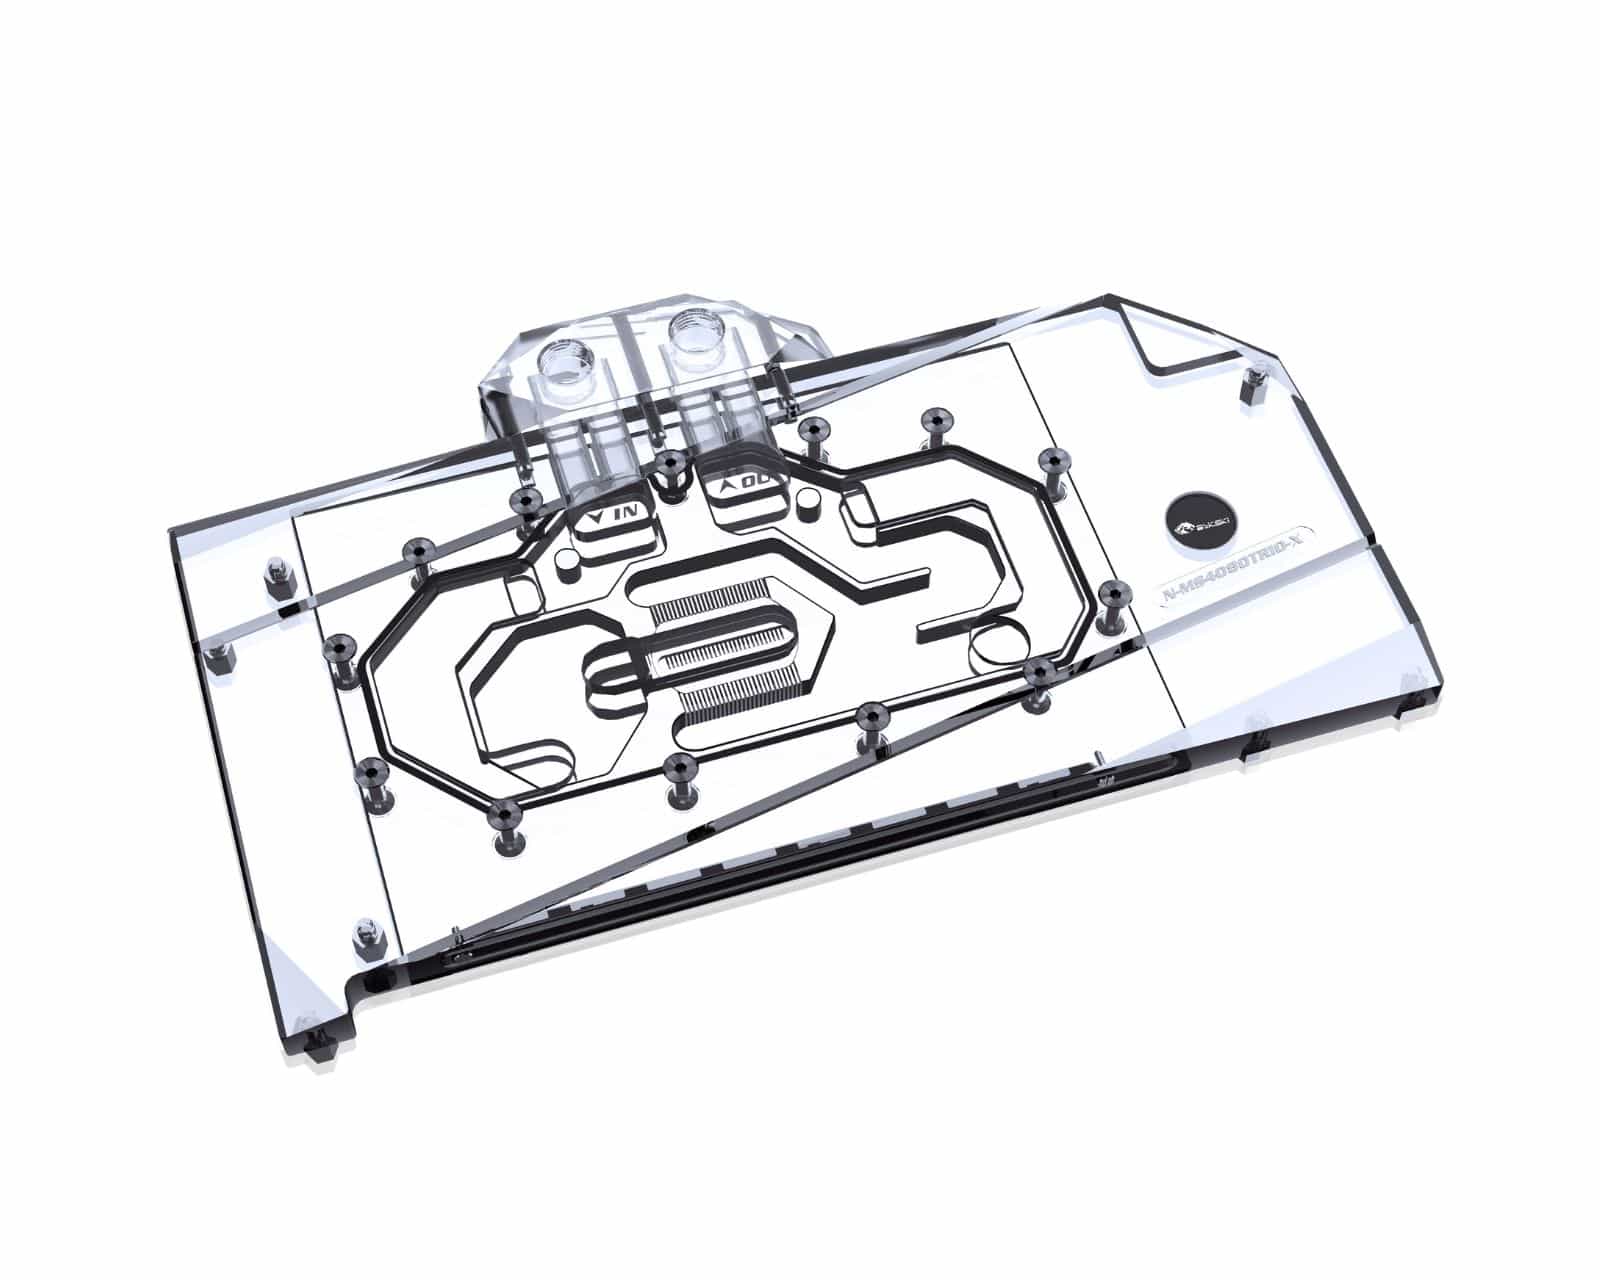 Bykski Full Coverage GPU Water Block and Backplate for MSI GeForce RTX 4080 Gaming X Trio (N-MS4080TRIO-X) - PrimoChill - KEEPING IT COOL